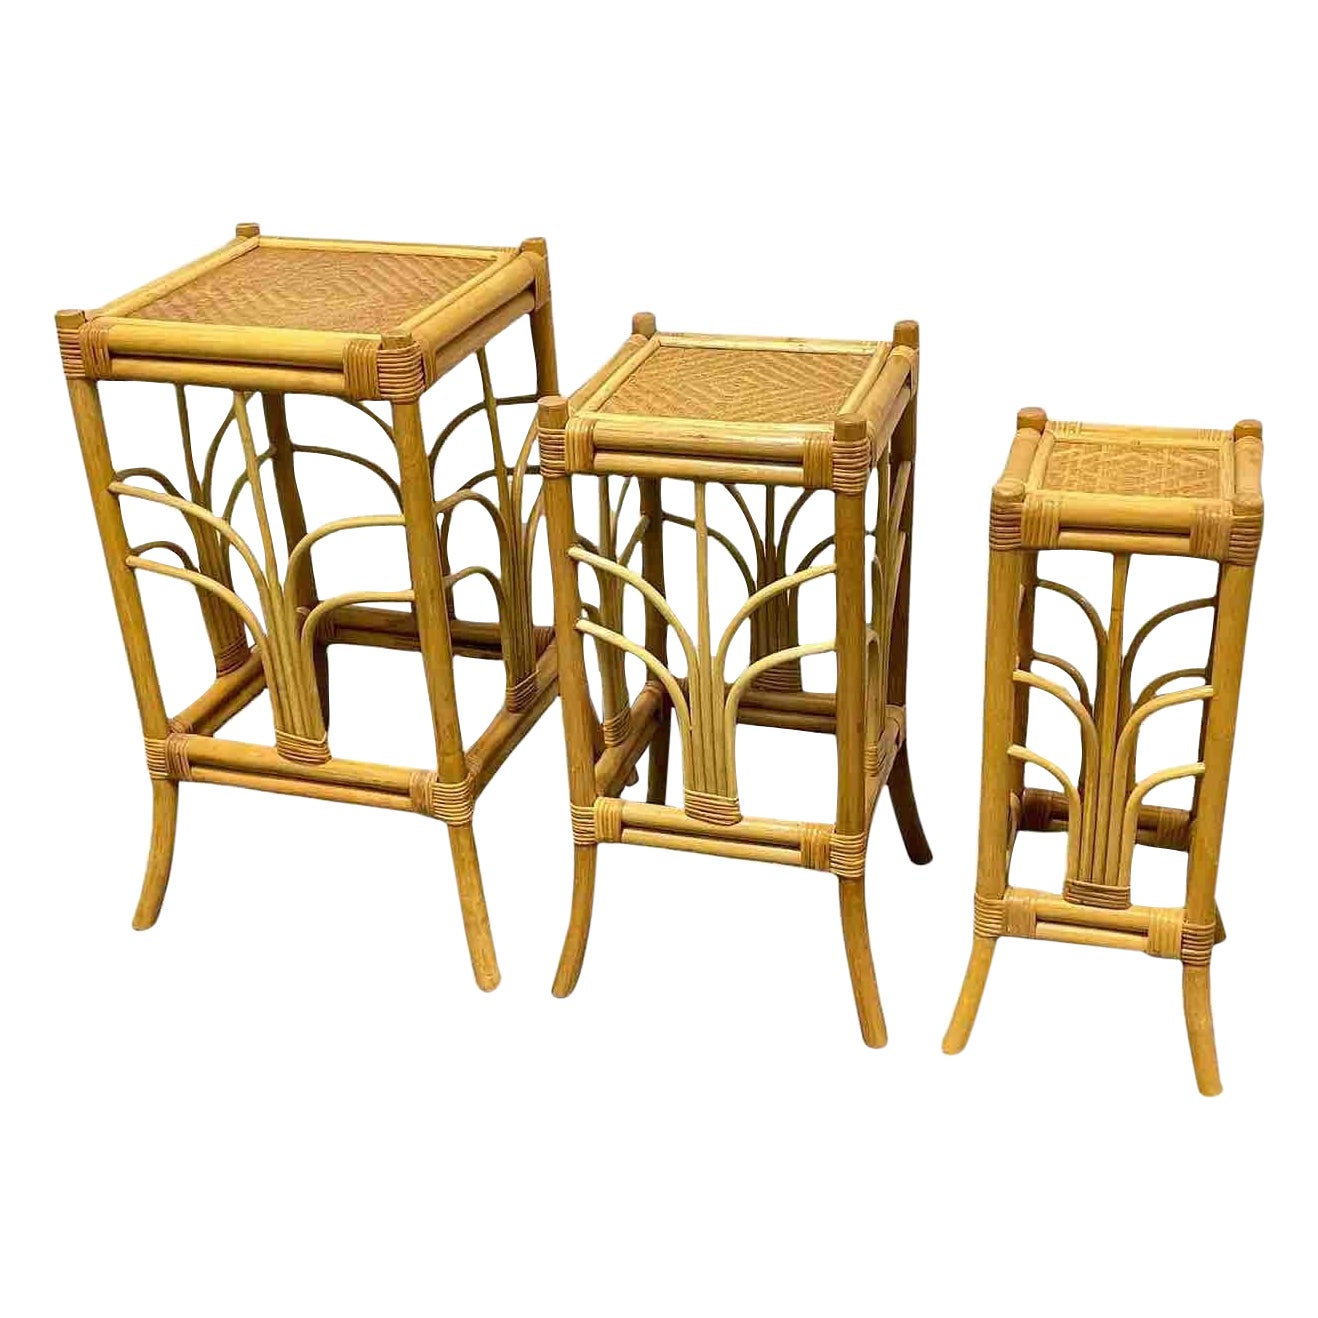 Set of Three Vintage Bohemian Rattan Bamboo Plant Stand Nesting Tables, Italy